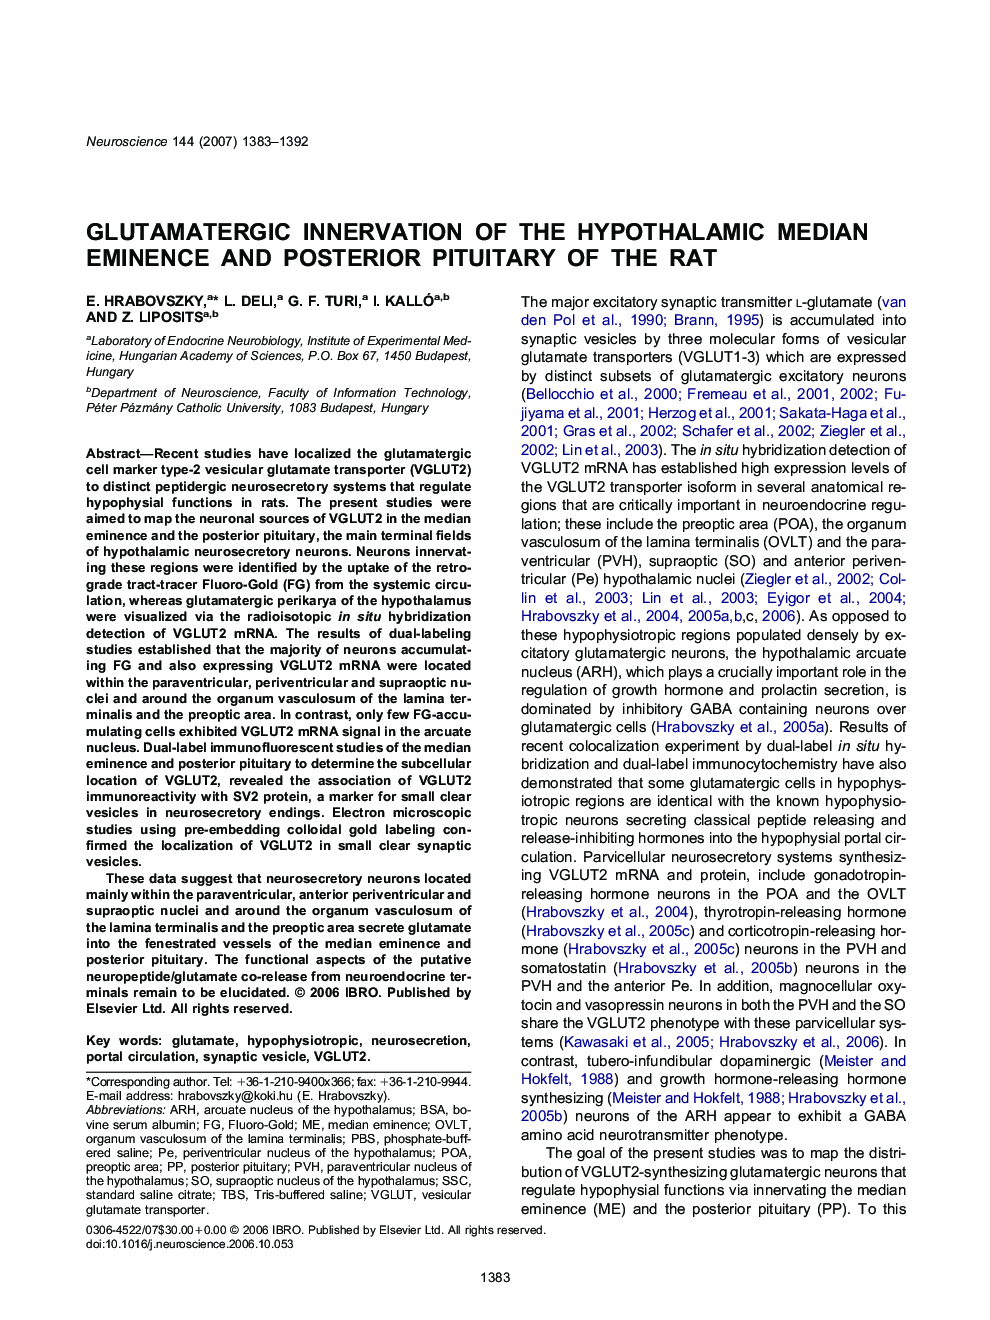 Glutamatergic innervation of the hypothalamic median eminence and posterior pituitary of the rat